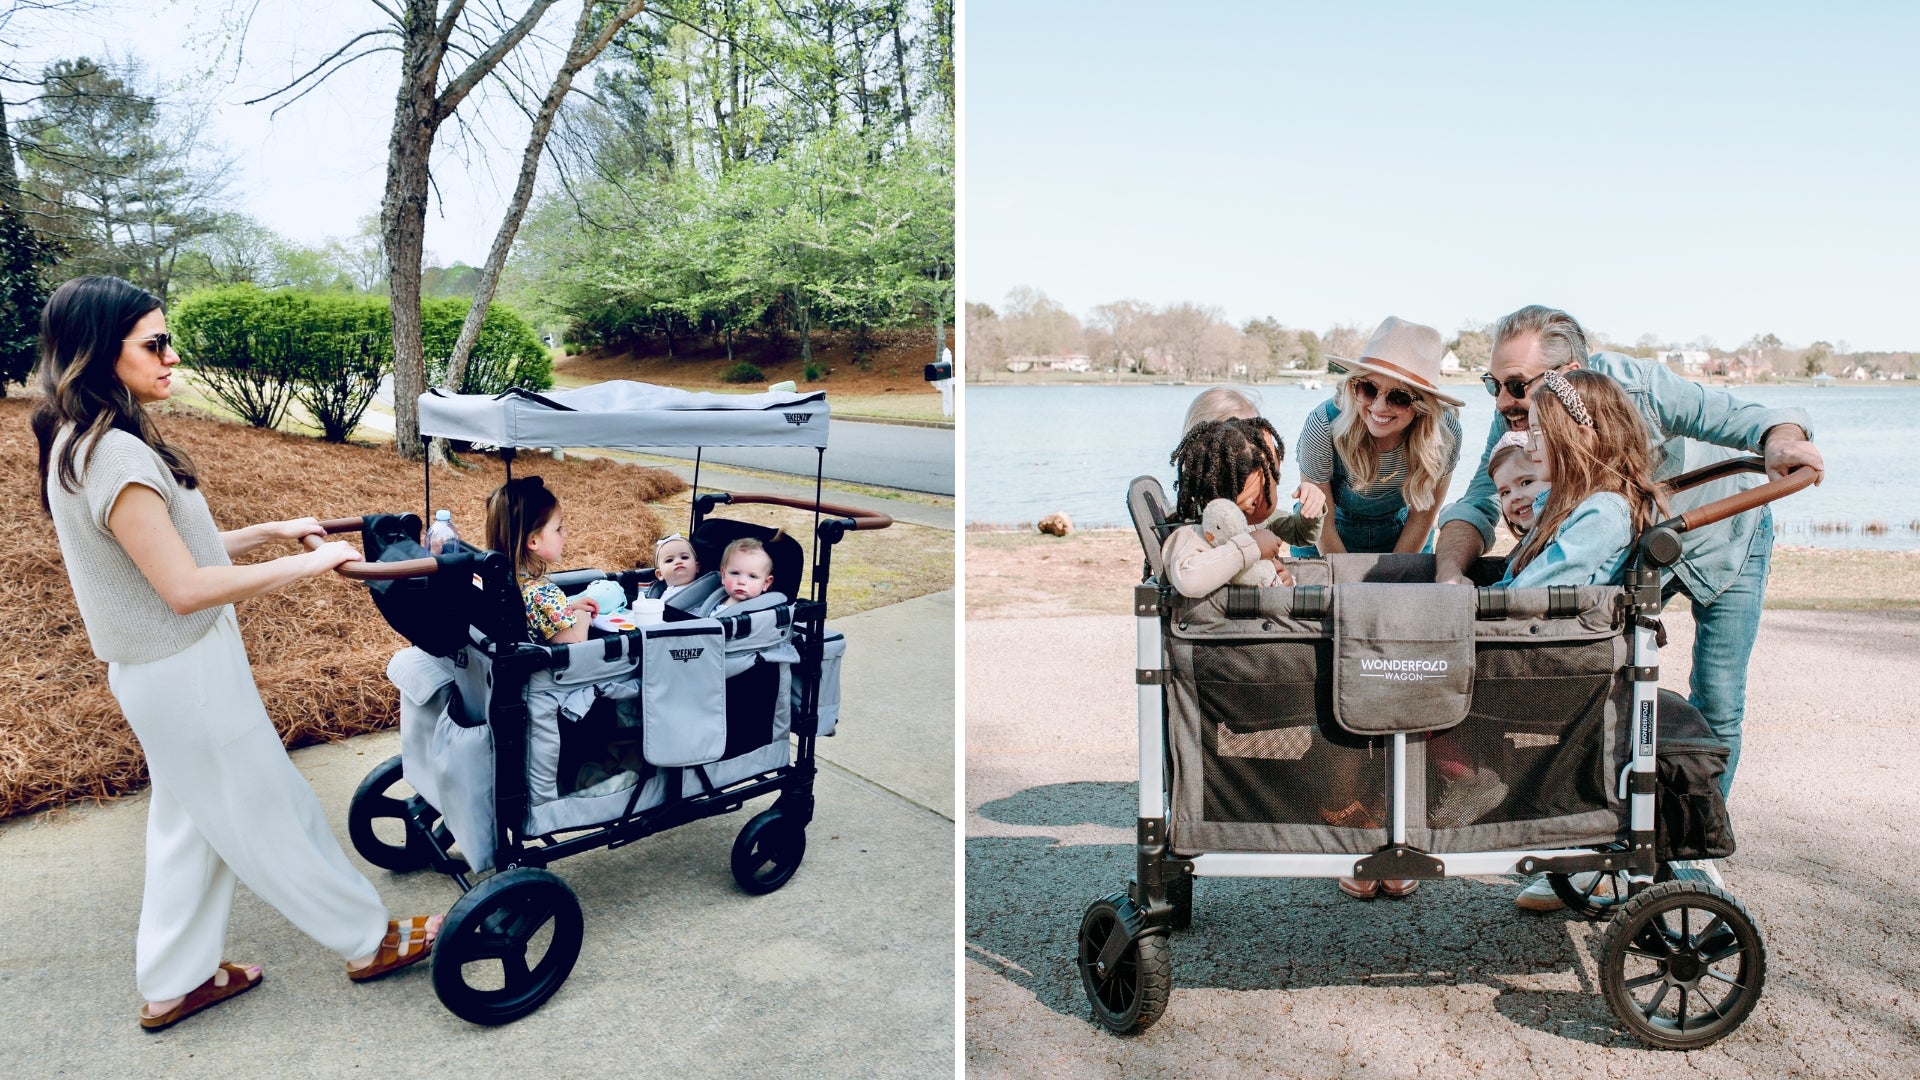 Keenz XC+ being pushed with multiple children and the WonderFold W4 Luxe with multiple kids